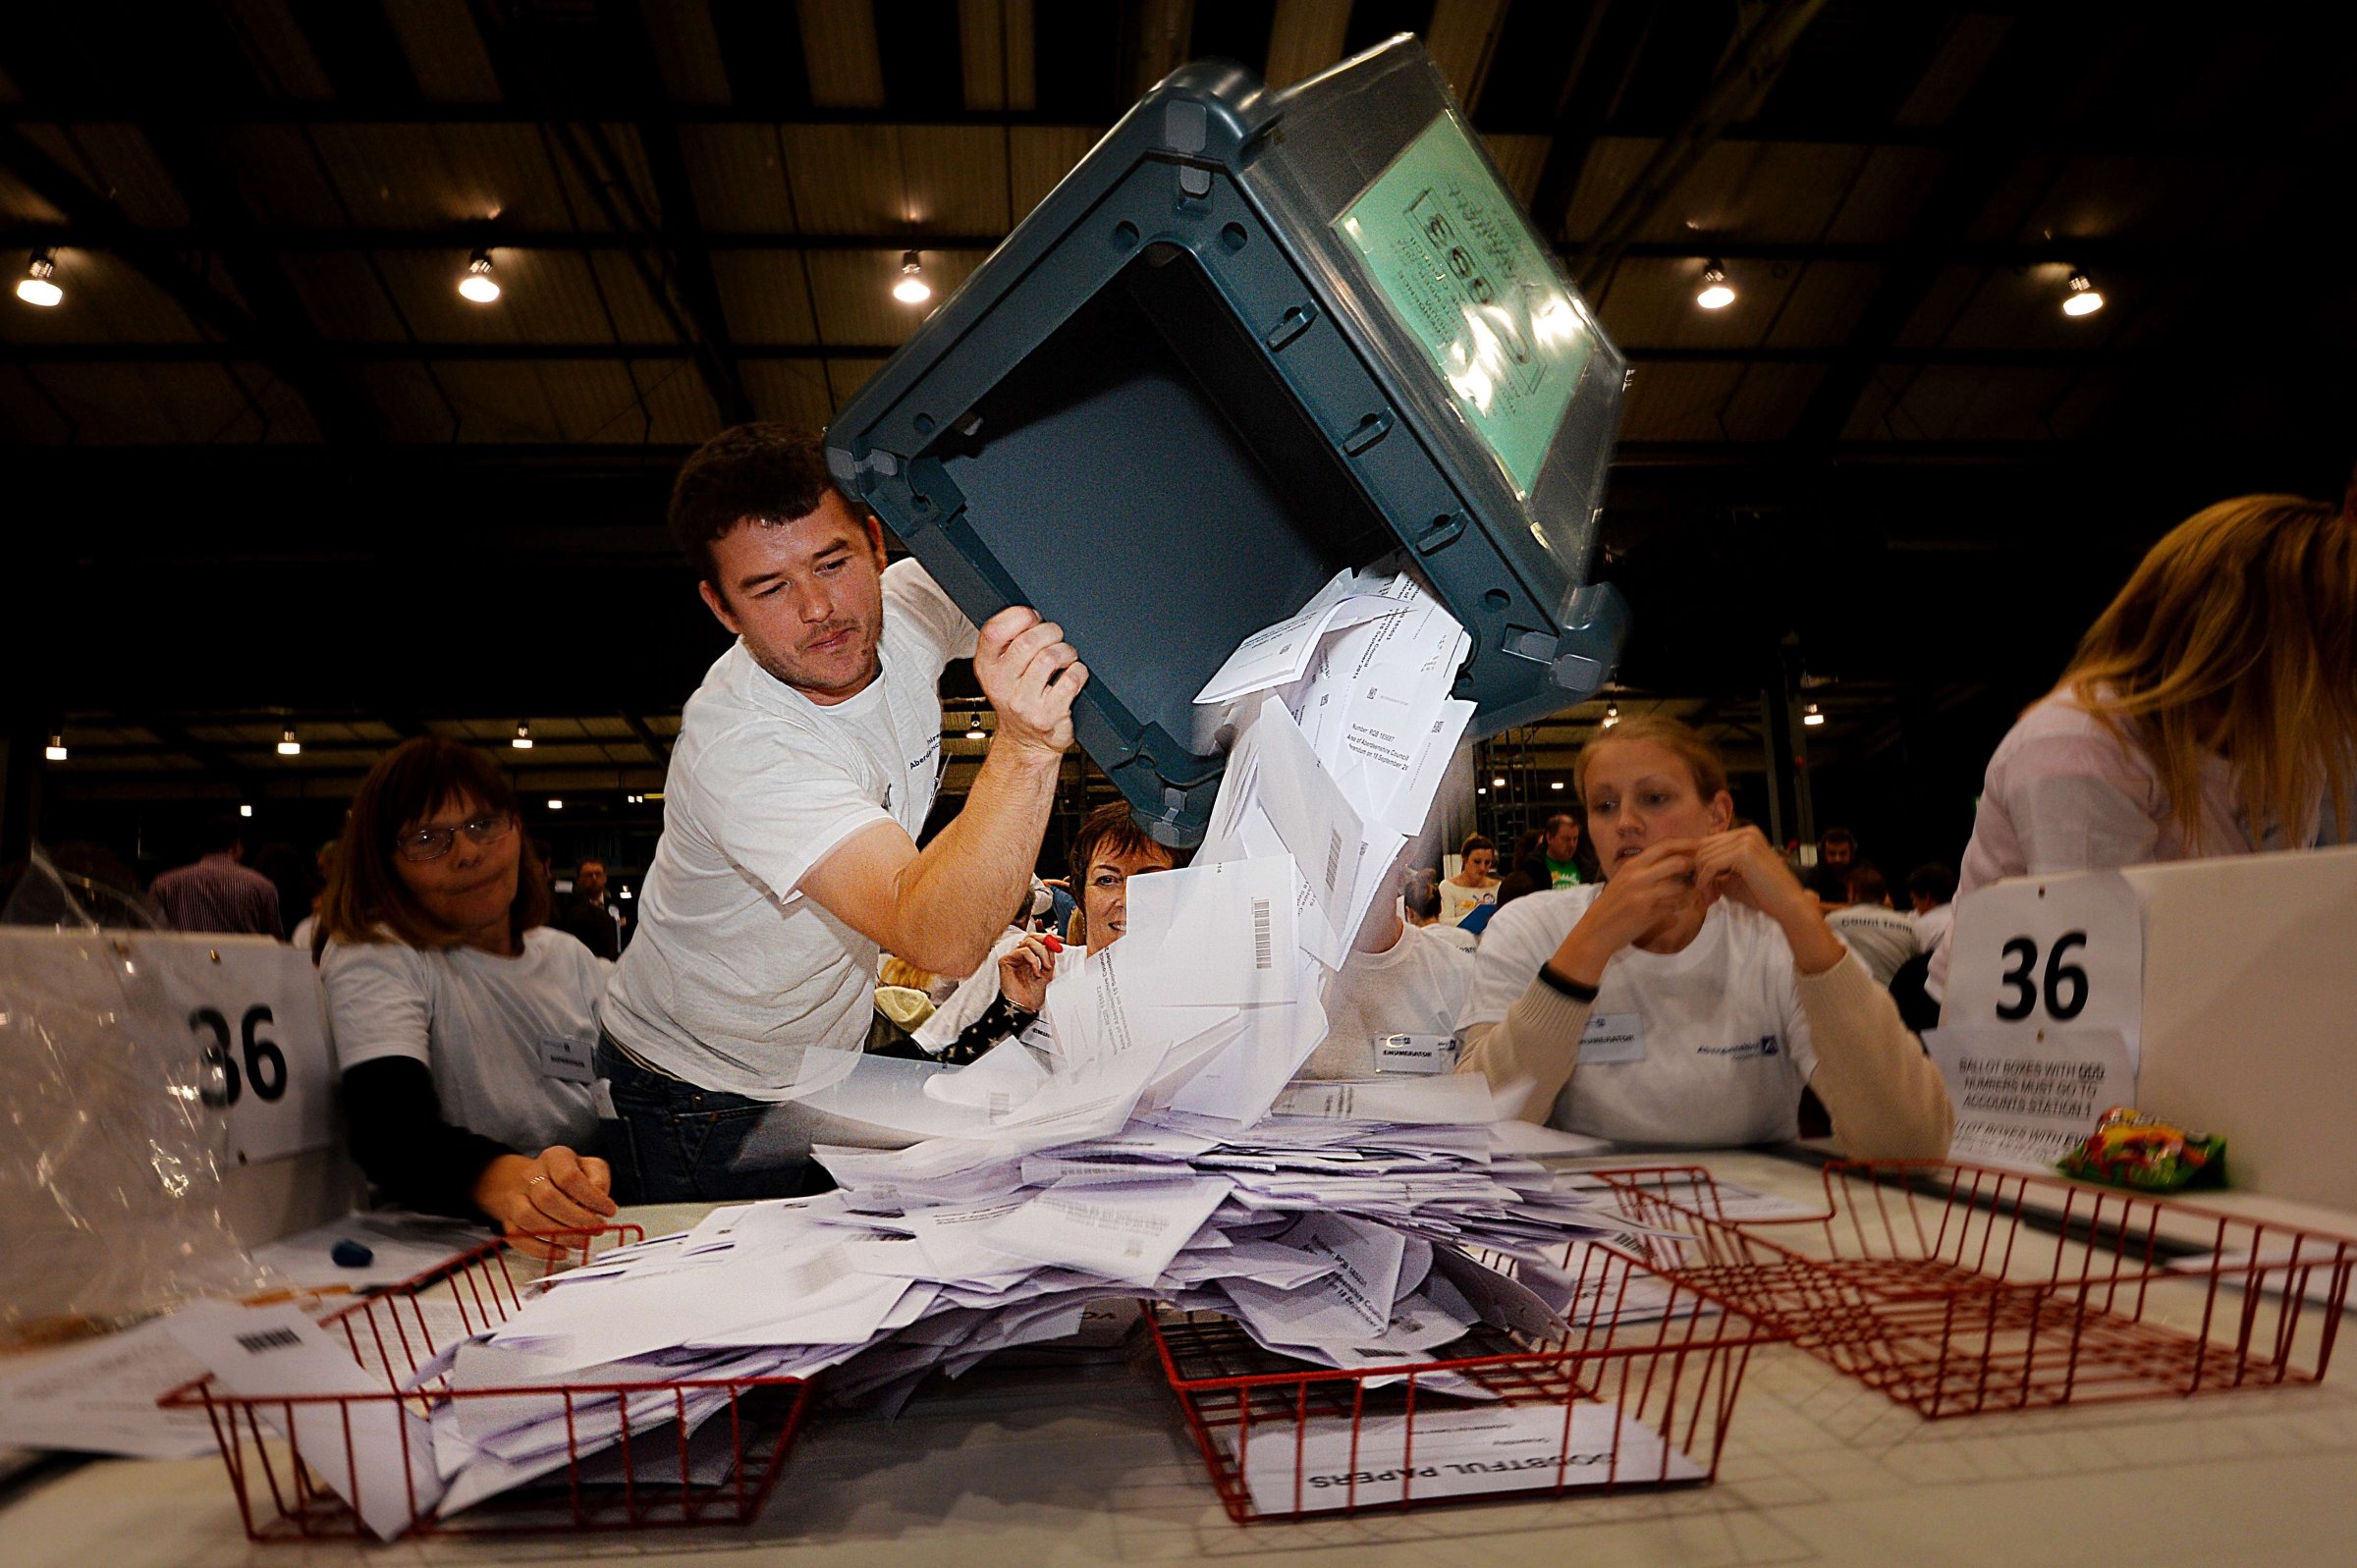 A worker tips out a ballot box in the Aberdeen Exhibition and Conference Centre in Aberdeen, on Sept.r 18, 2014, immediately after the polls close in the referendum on Scotland's independence.